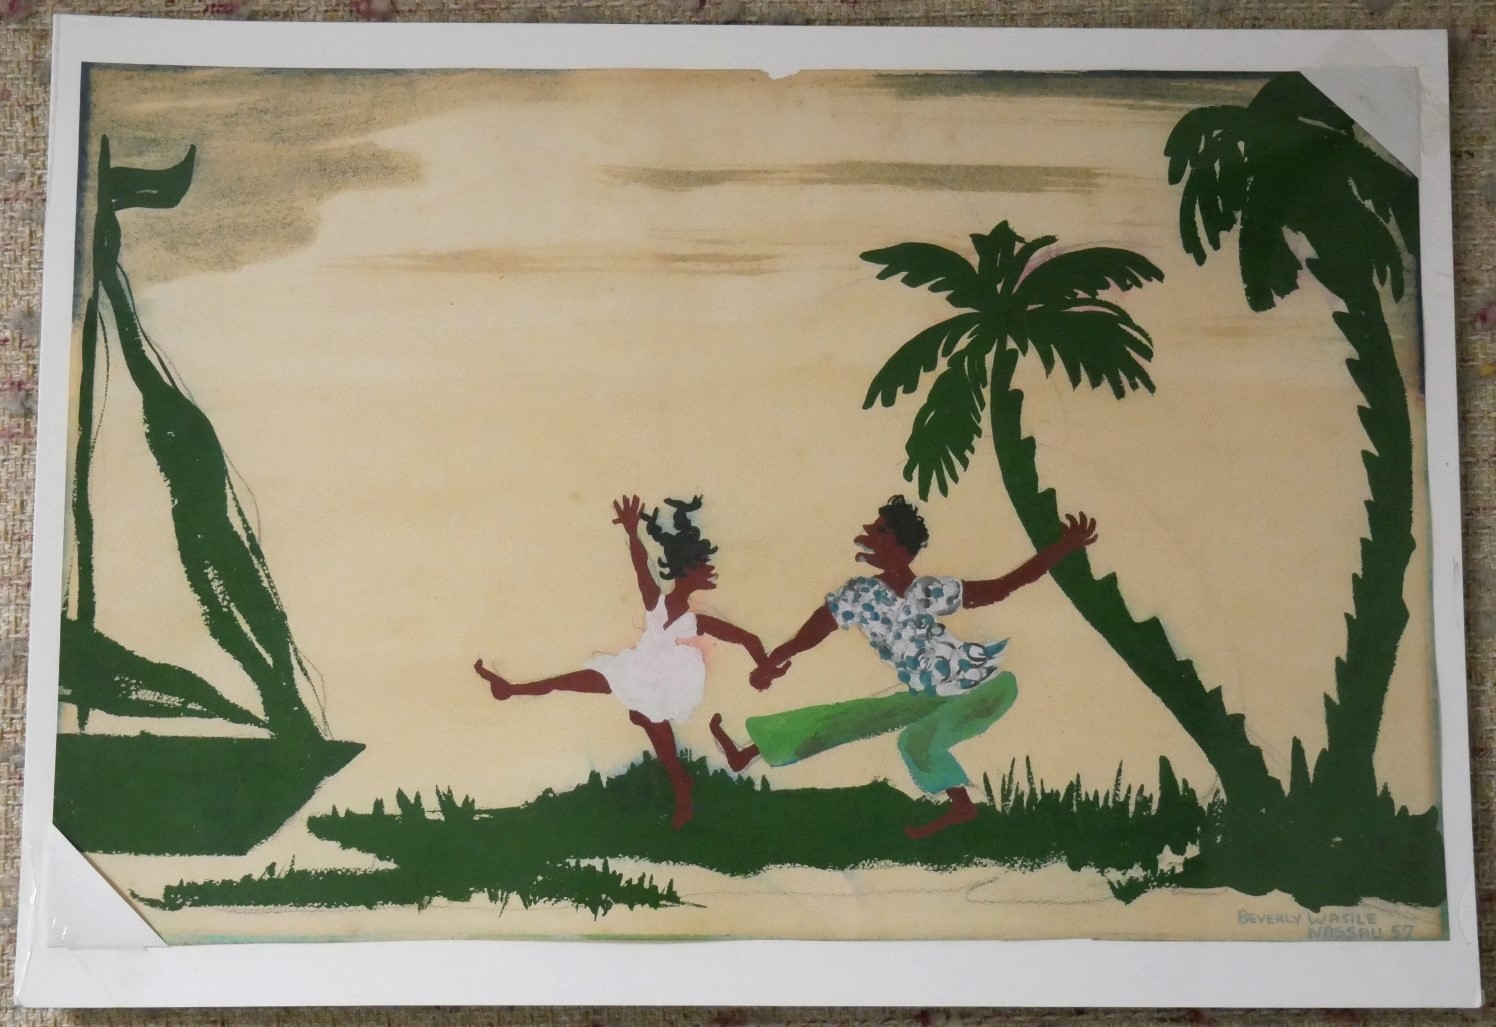 Couple Dancing on Nassau Beach, Bahamas by Beverly Wasile, 1957 original painting (untitled), gouache on paper, signed and dated by the artist - shown as packaged with corner mounts on a backing board (available from KerrisdaleGallery.com, stock ID# WB957ph)